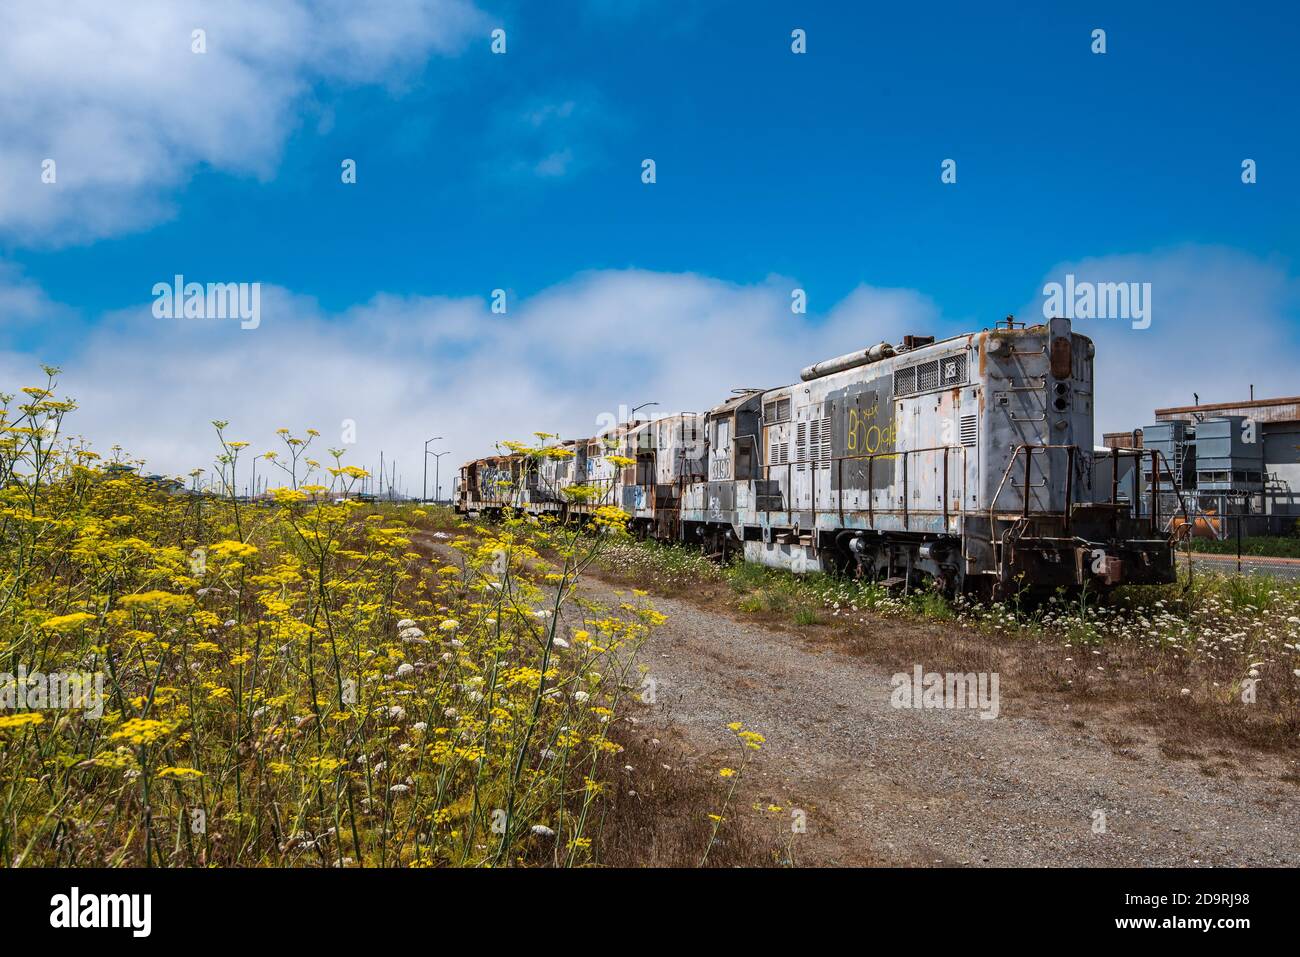 Abandoned Railway Locomotives in Crescent City in California Stock Photo